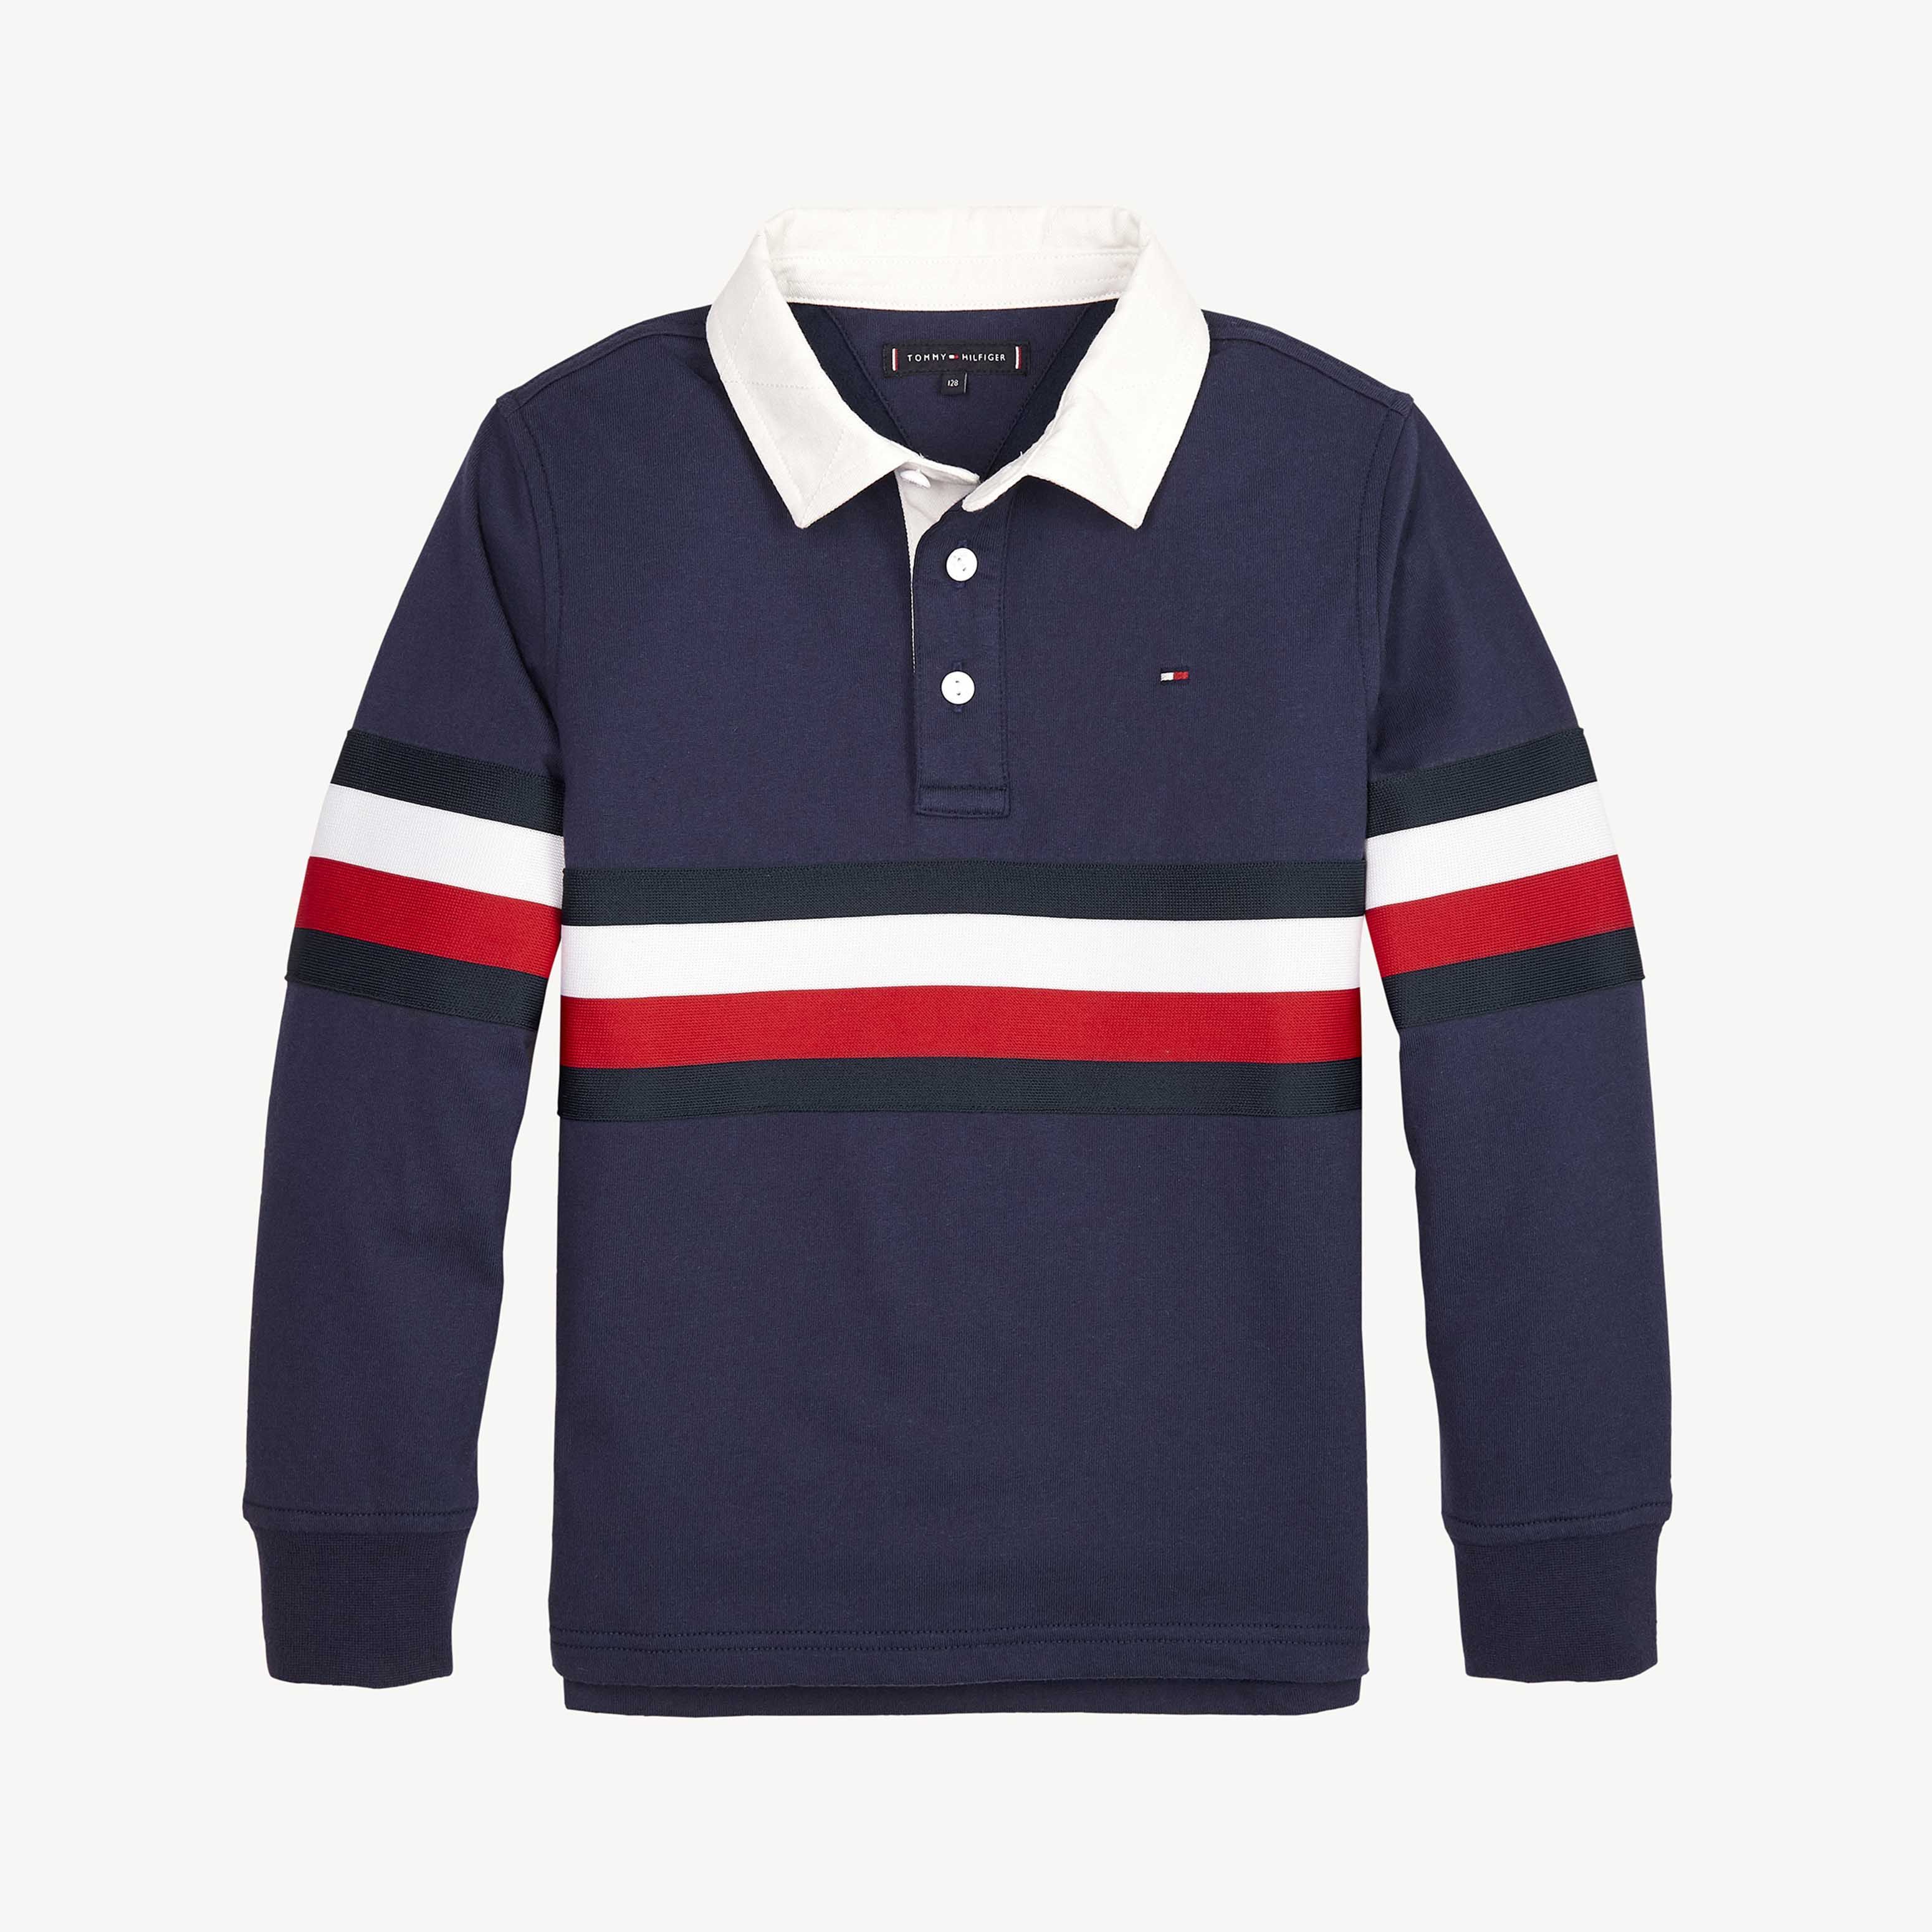 hilfiger rugby polo